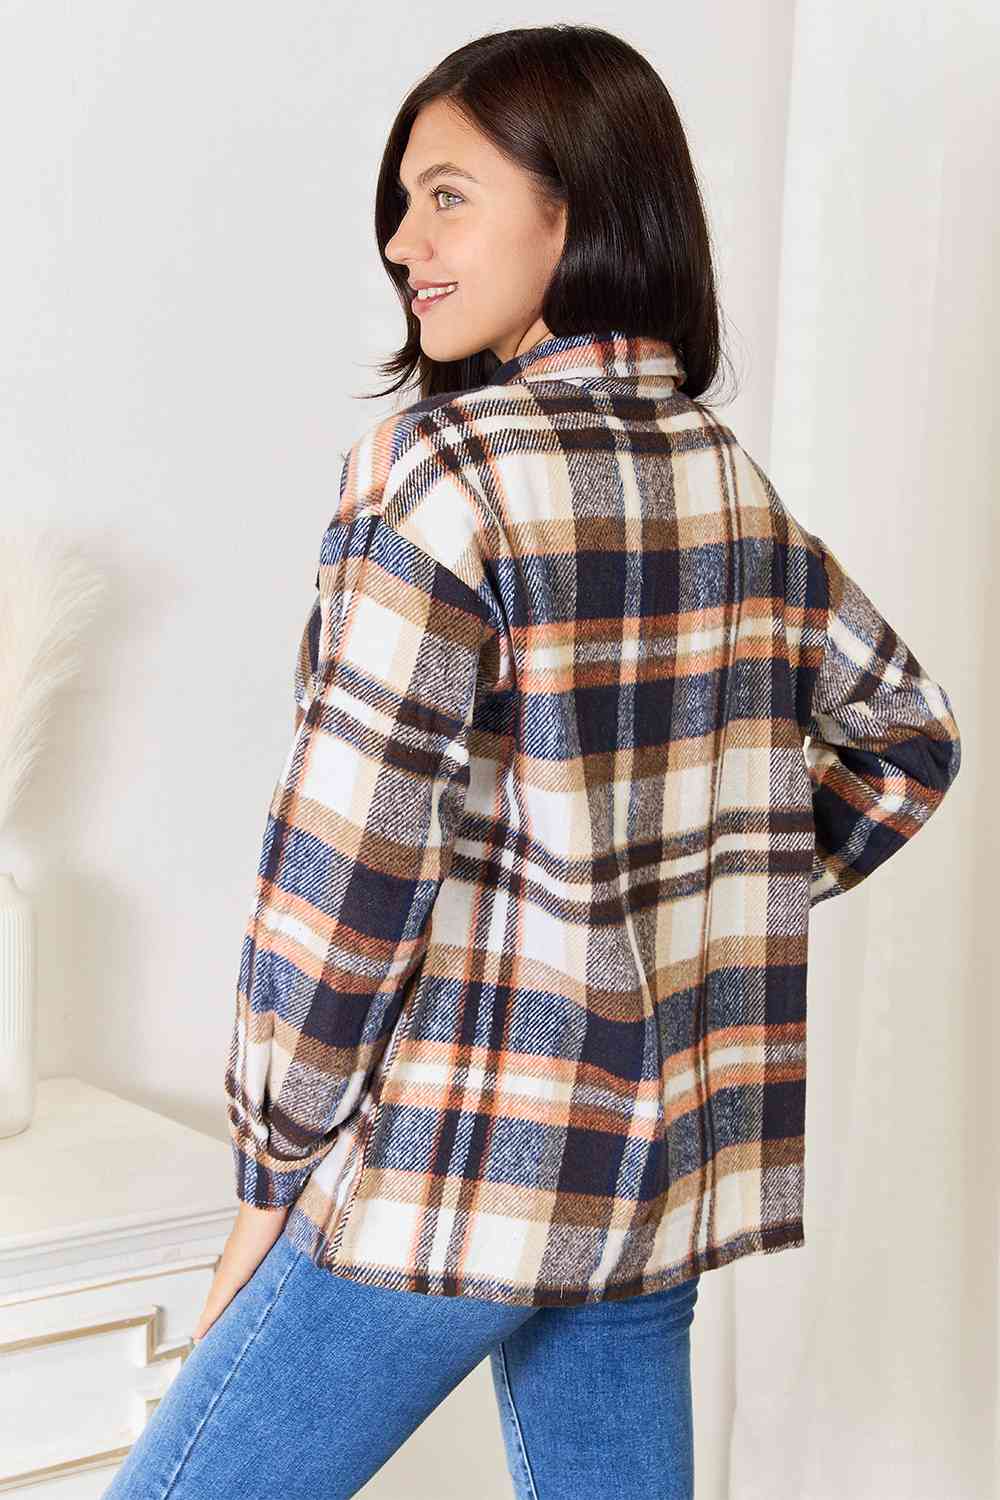 Double Take Plaid Button Front Shirt Jacket with Breast Pockets-Outerwear-Inspired by Justeen-Women's Clothing Boutique in Chicago, Illinois